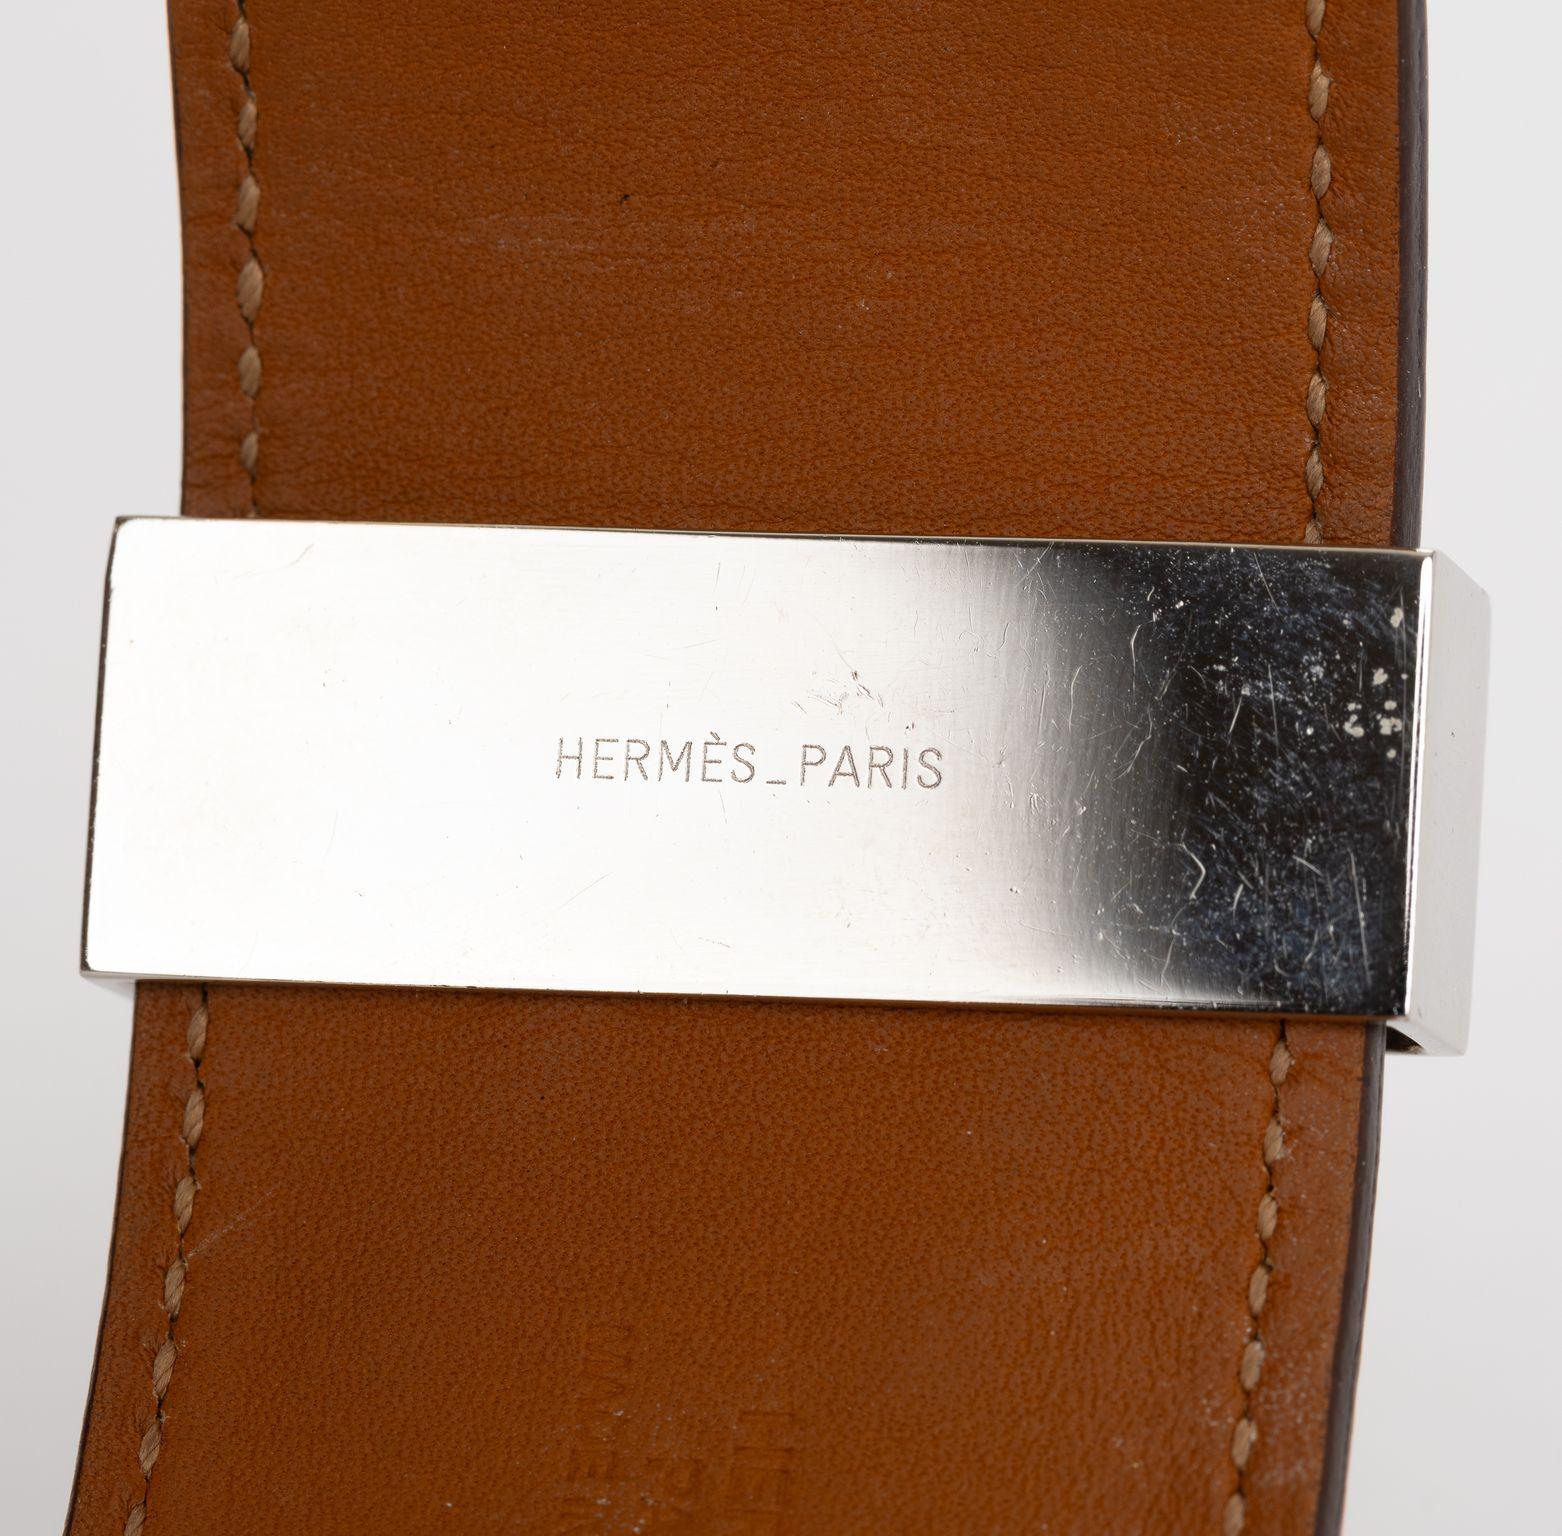 Hermes Etoupe Collier De Chien Bracelet In Good Condition For Sale In West Hollywood, CA